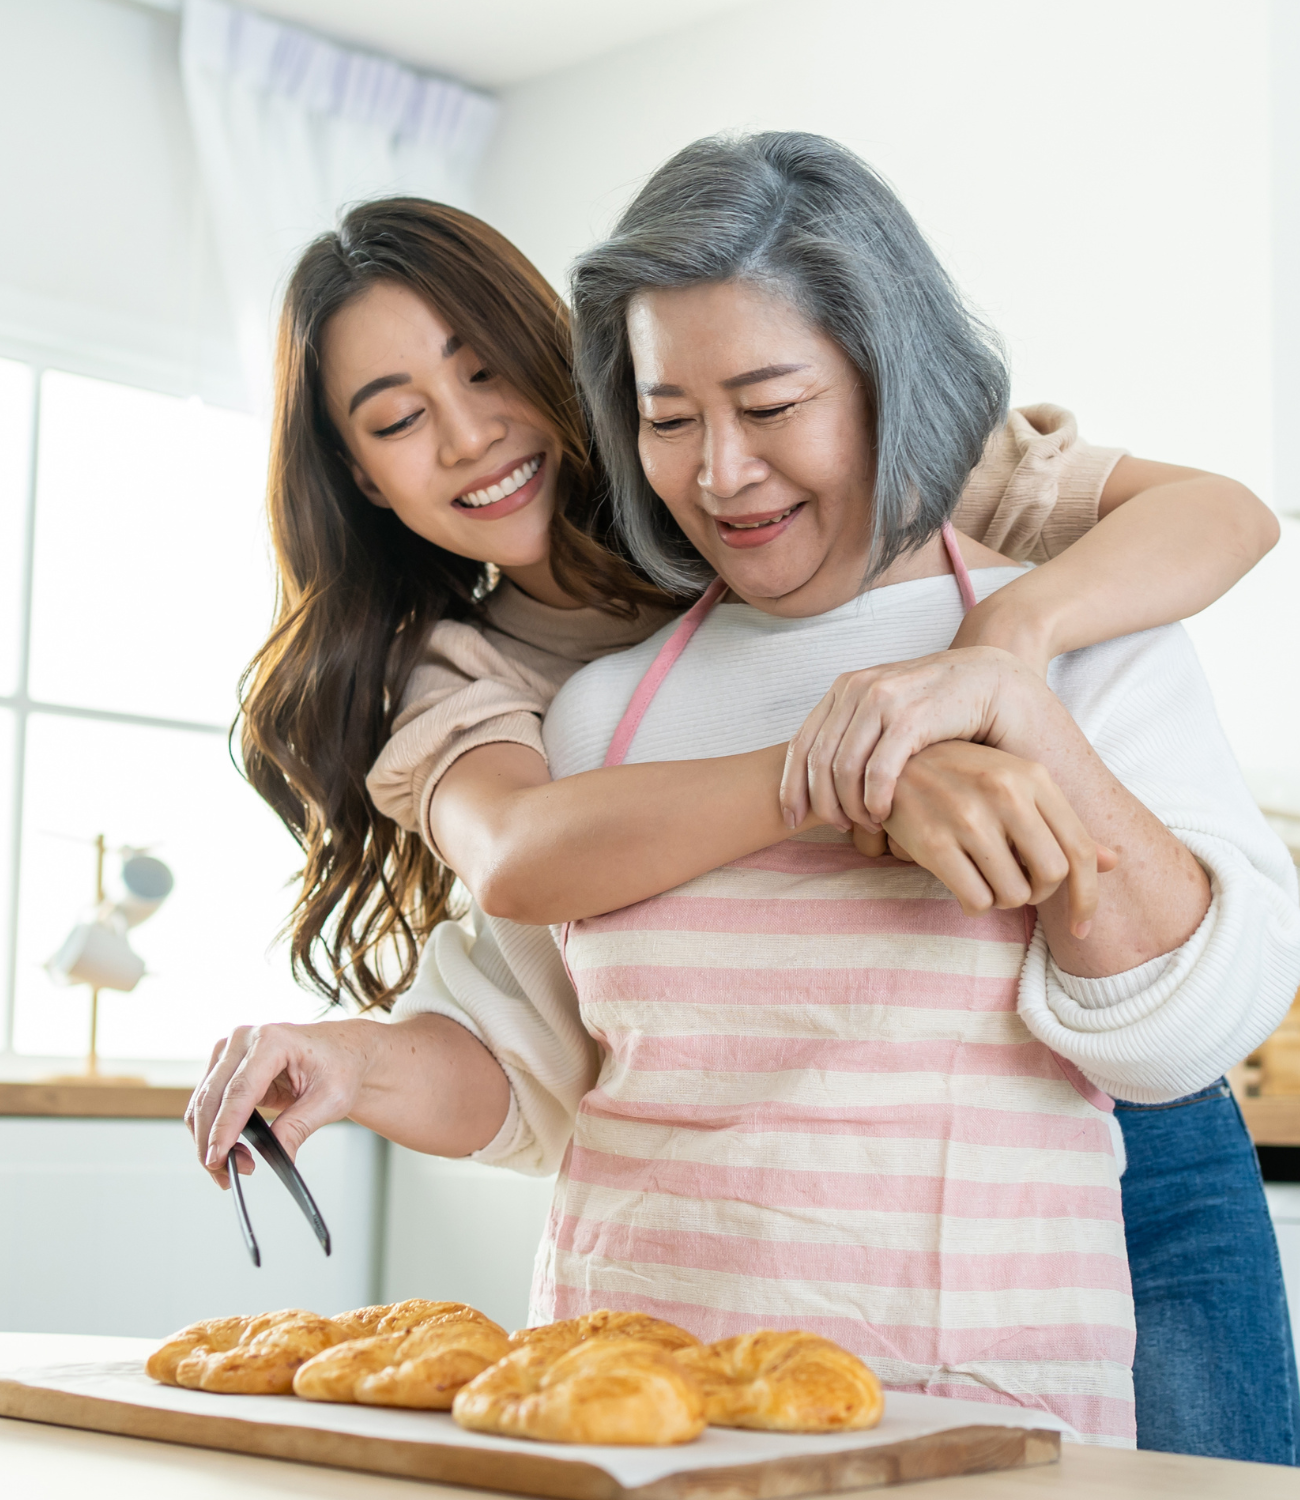 a woman embracing an older woman over the shoulders, as she is picking up food with tongs